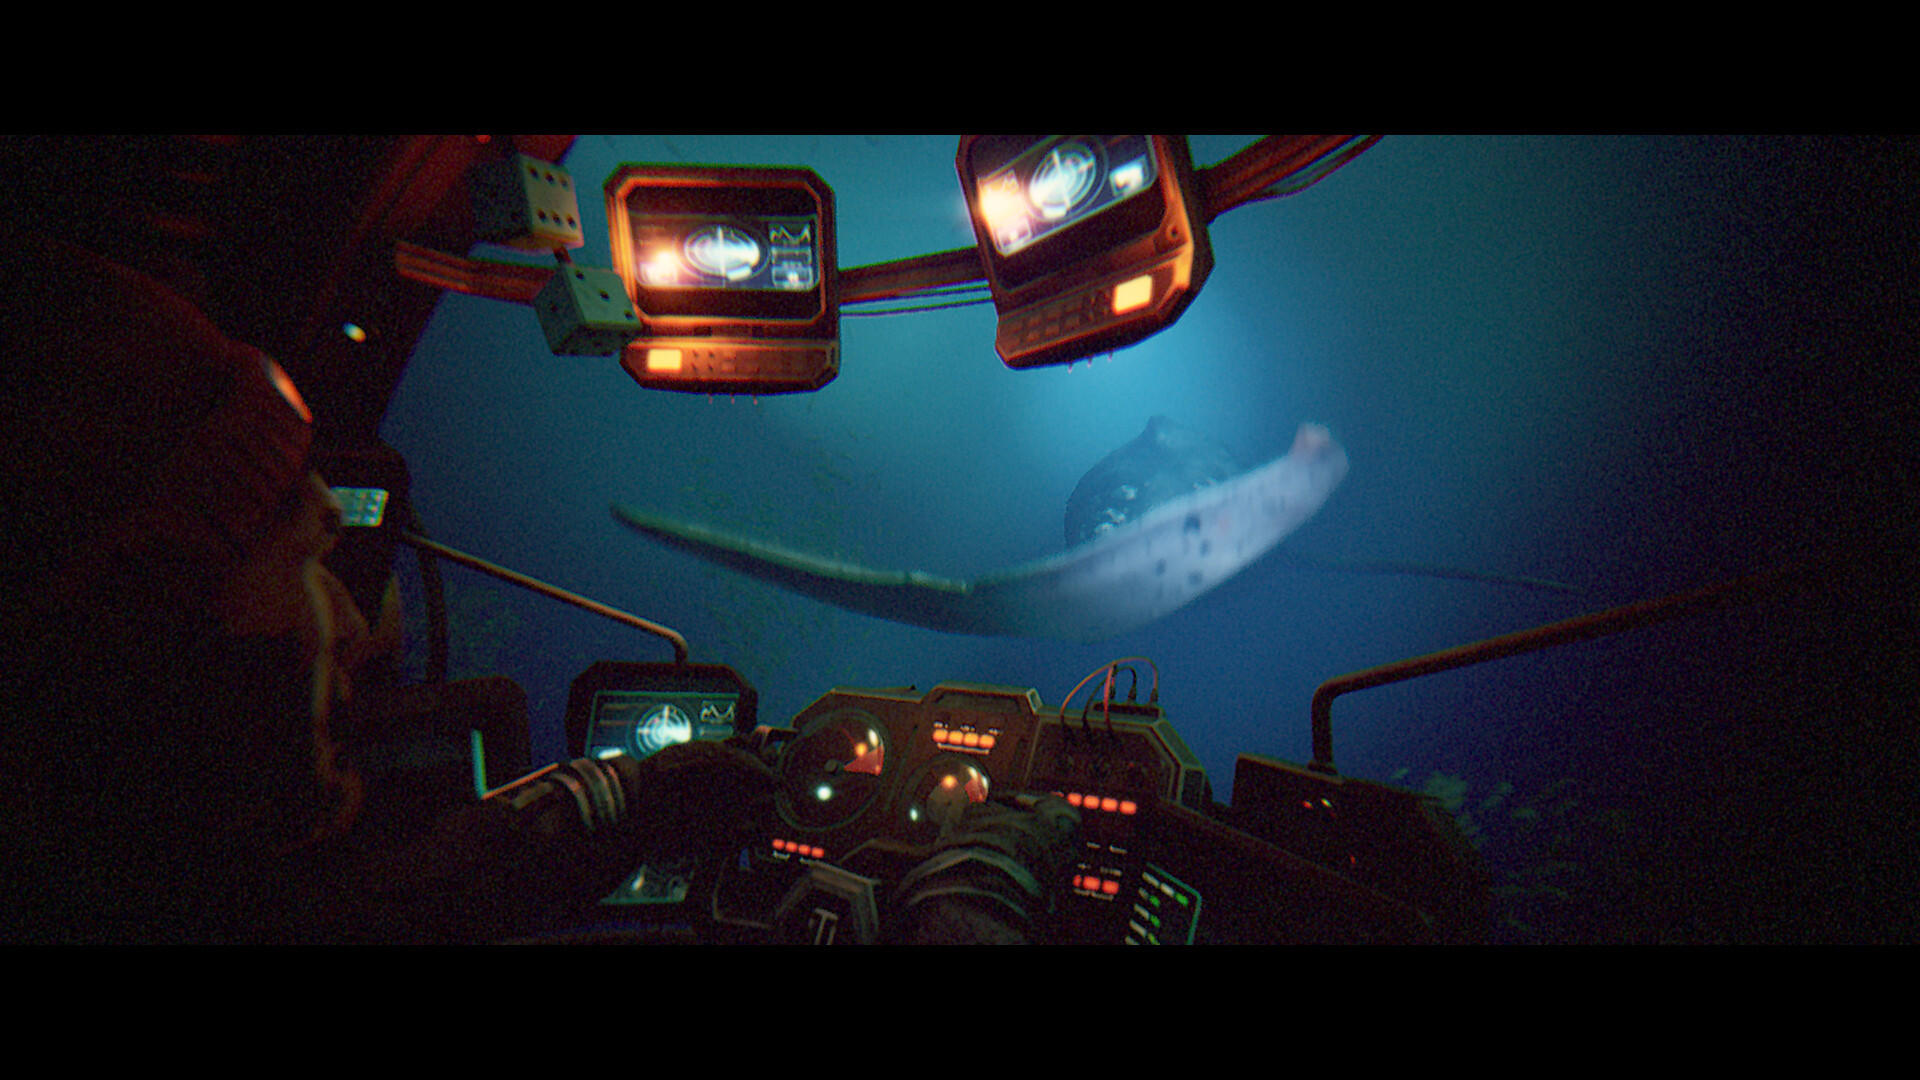 Under The Waves screenshot game